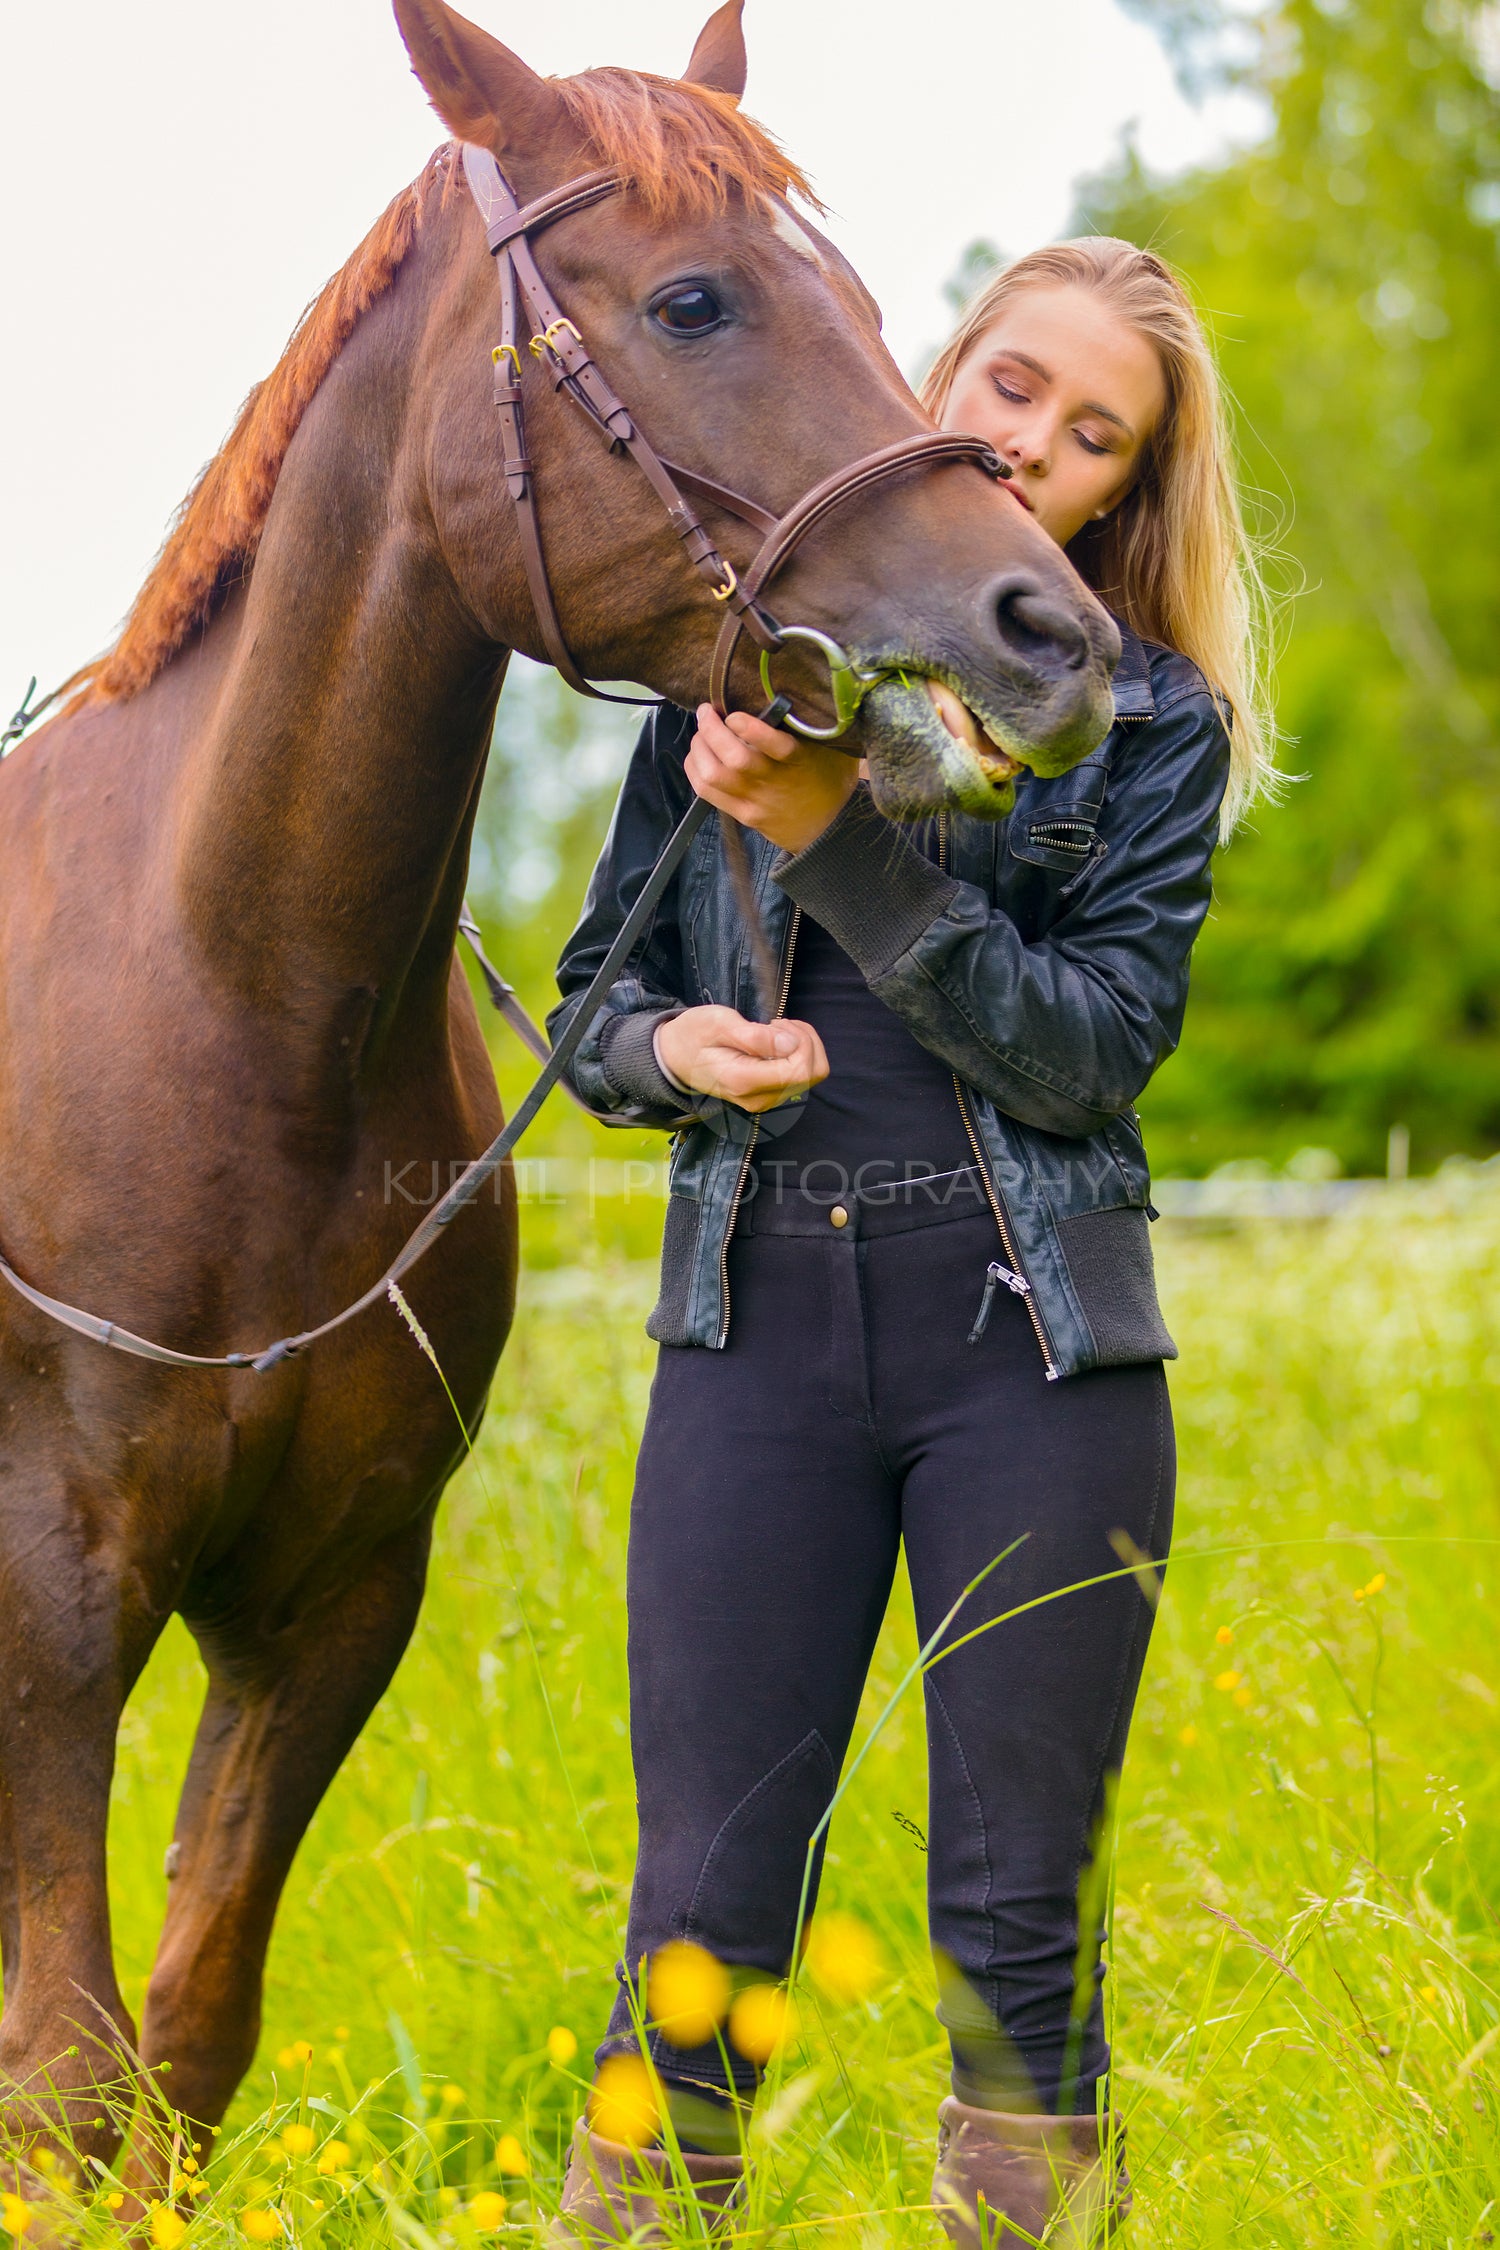 Woman communicate with her beautilful arabian horse friend in the field